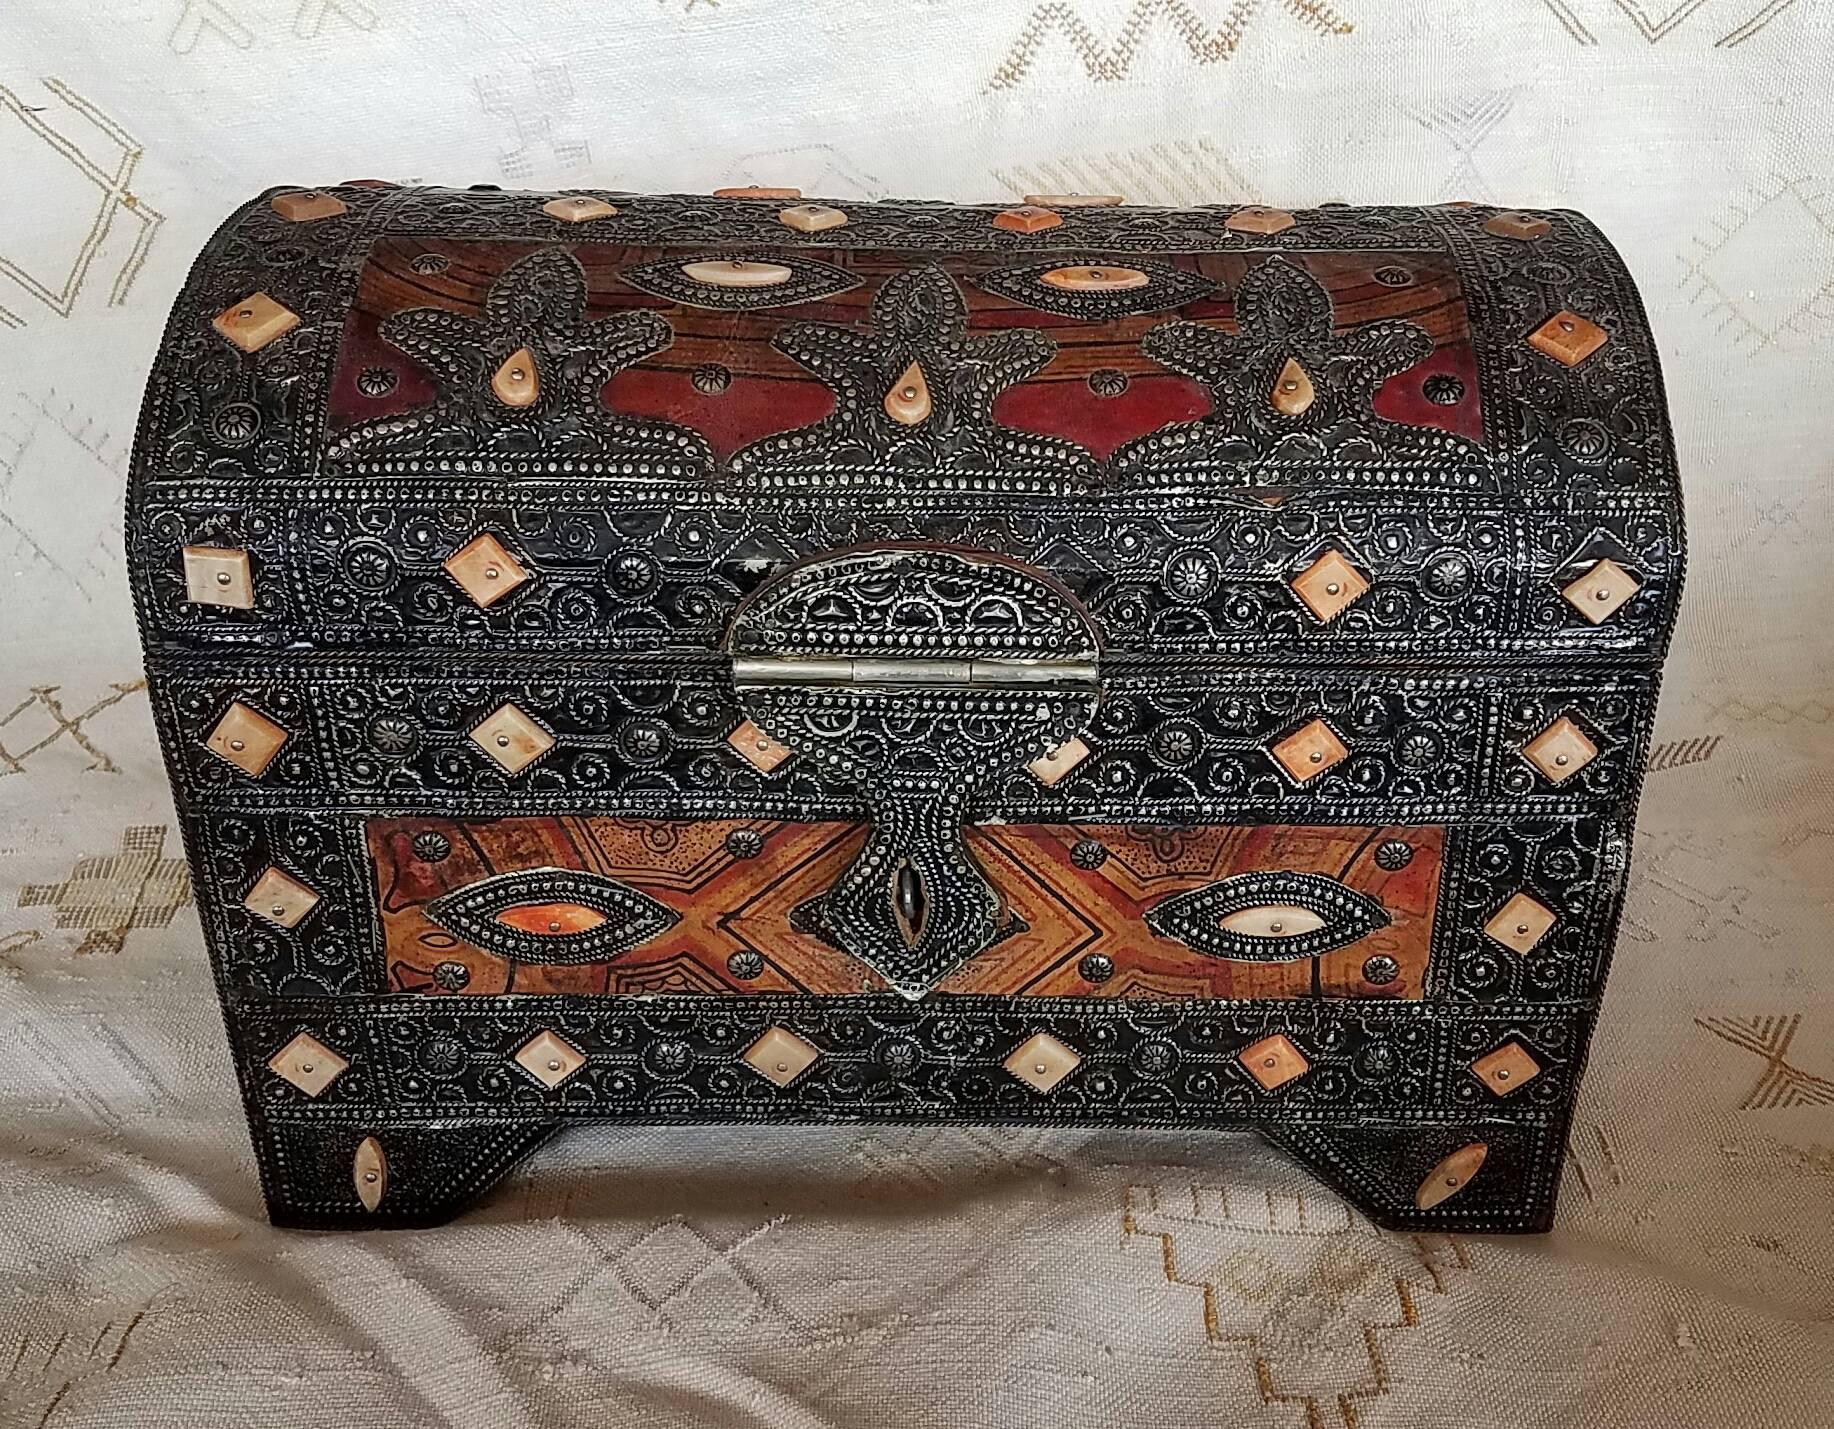 White and orange Camel Bone diamonds and metal inlaid, make this one of a kind trunk a stunning accessory to use anywhere in your home or office. Meticulous work throughout this beautiful piece of art. Measuring approximately 17″ long and 11 high,